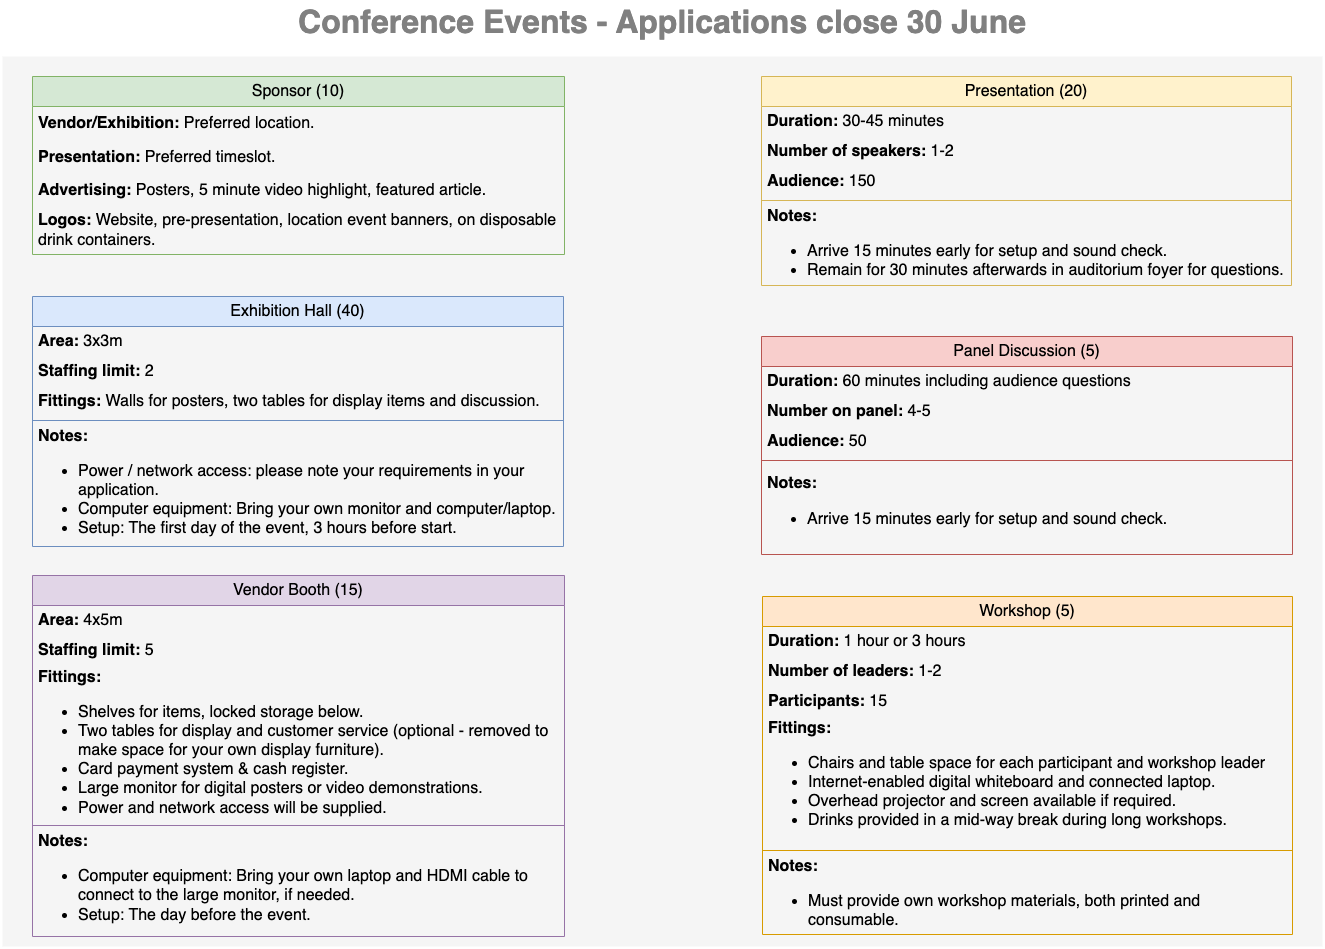 List shapes can be used to detail the individual events and their requirements for a conference